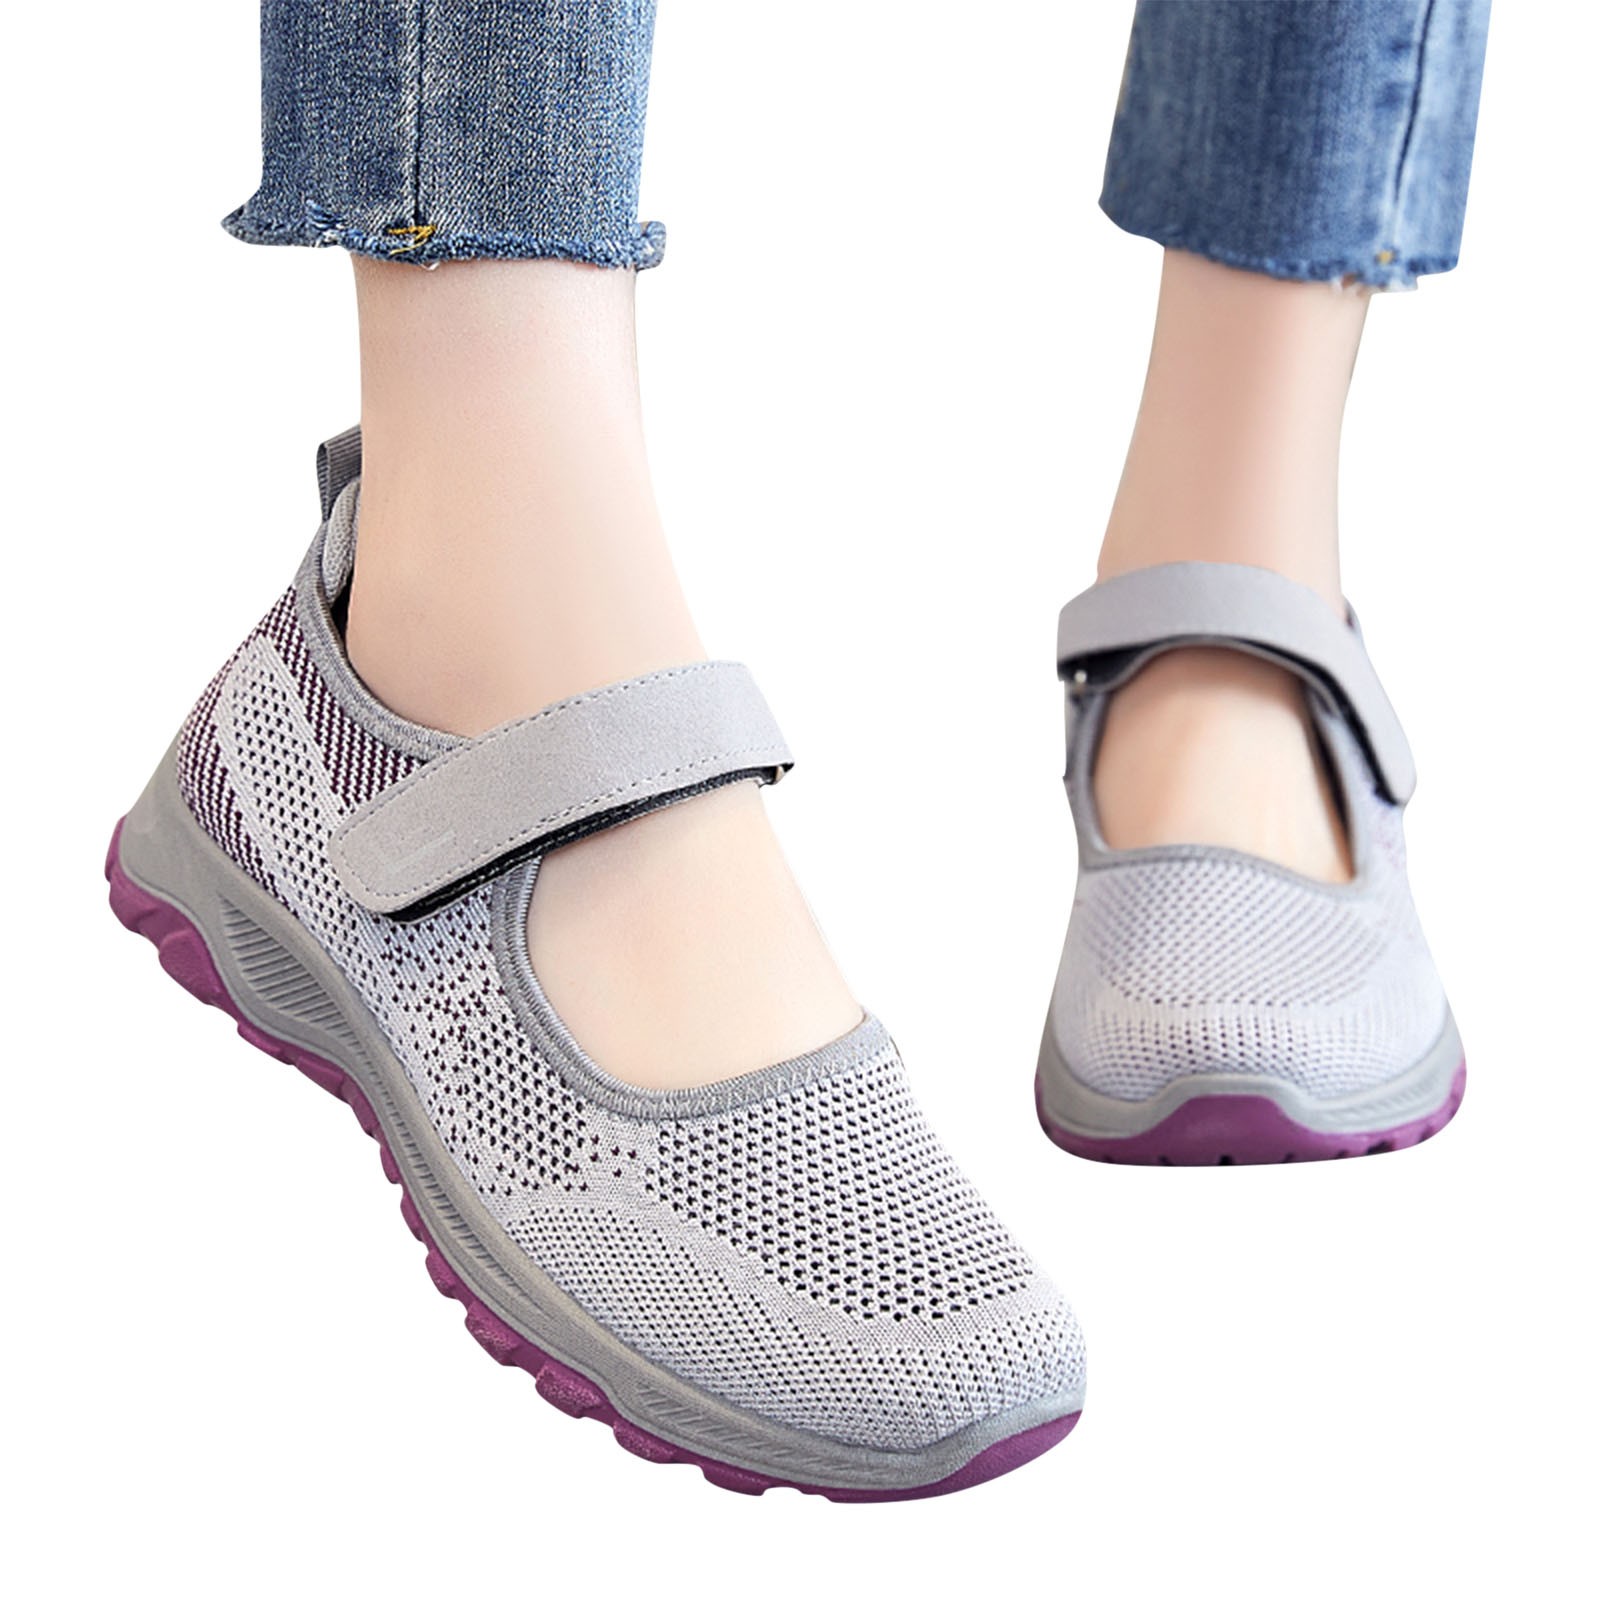 2 Comfortable and Stylish Walking Shoes for Travel - Merrick's Art